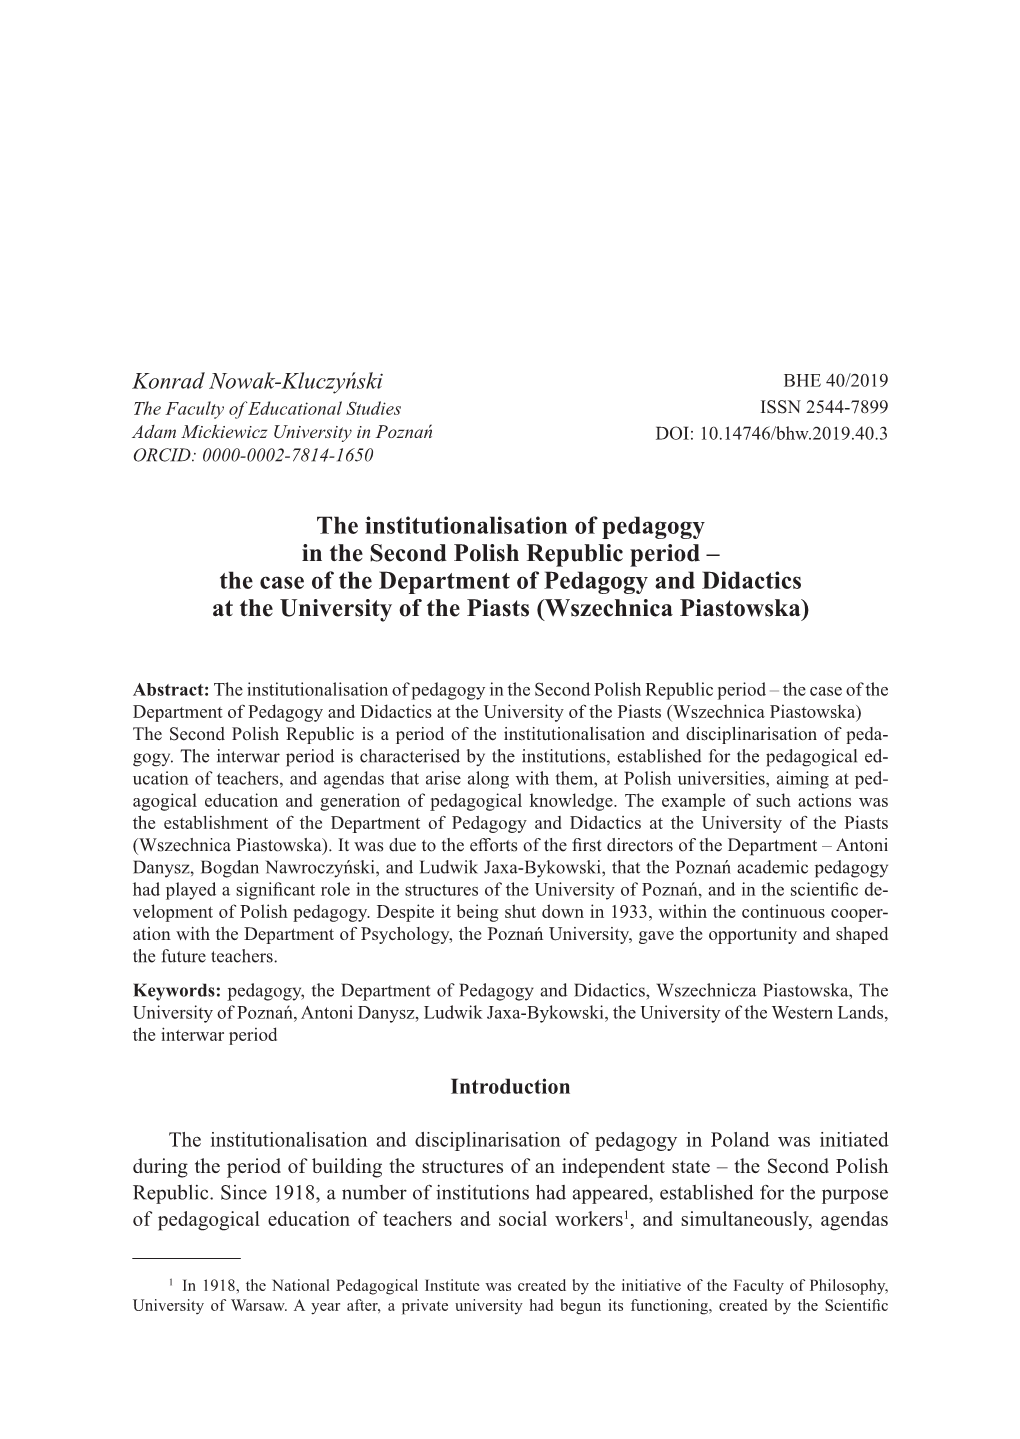 The Institutionalisation of Pedagogy in the Second Polish